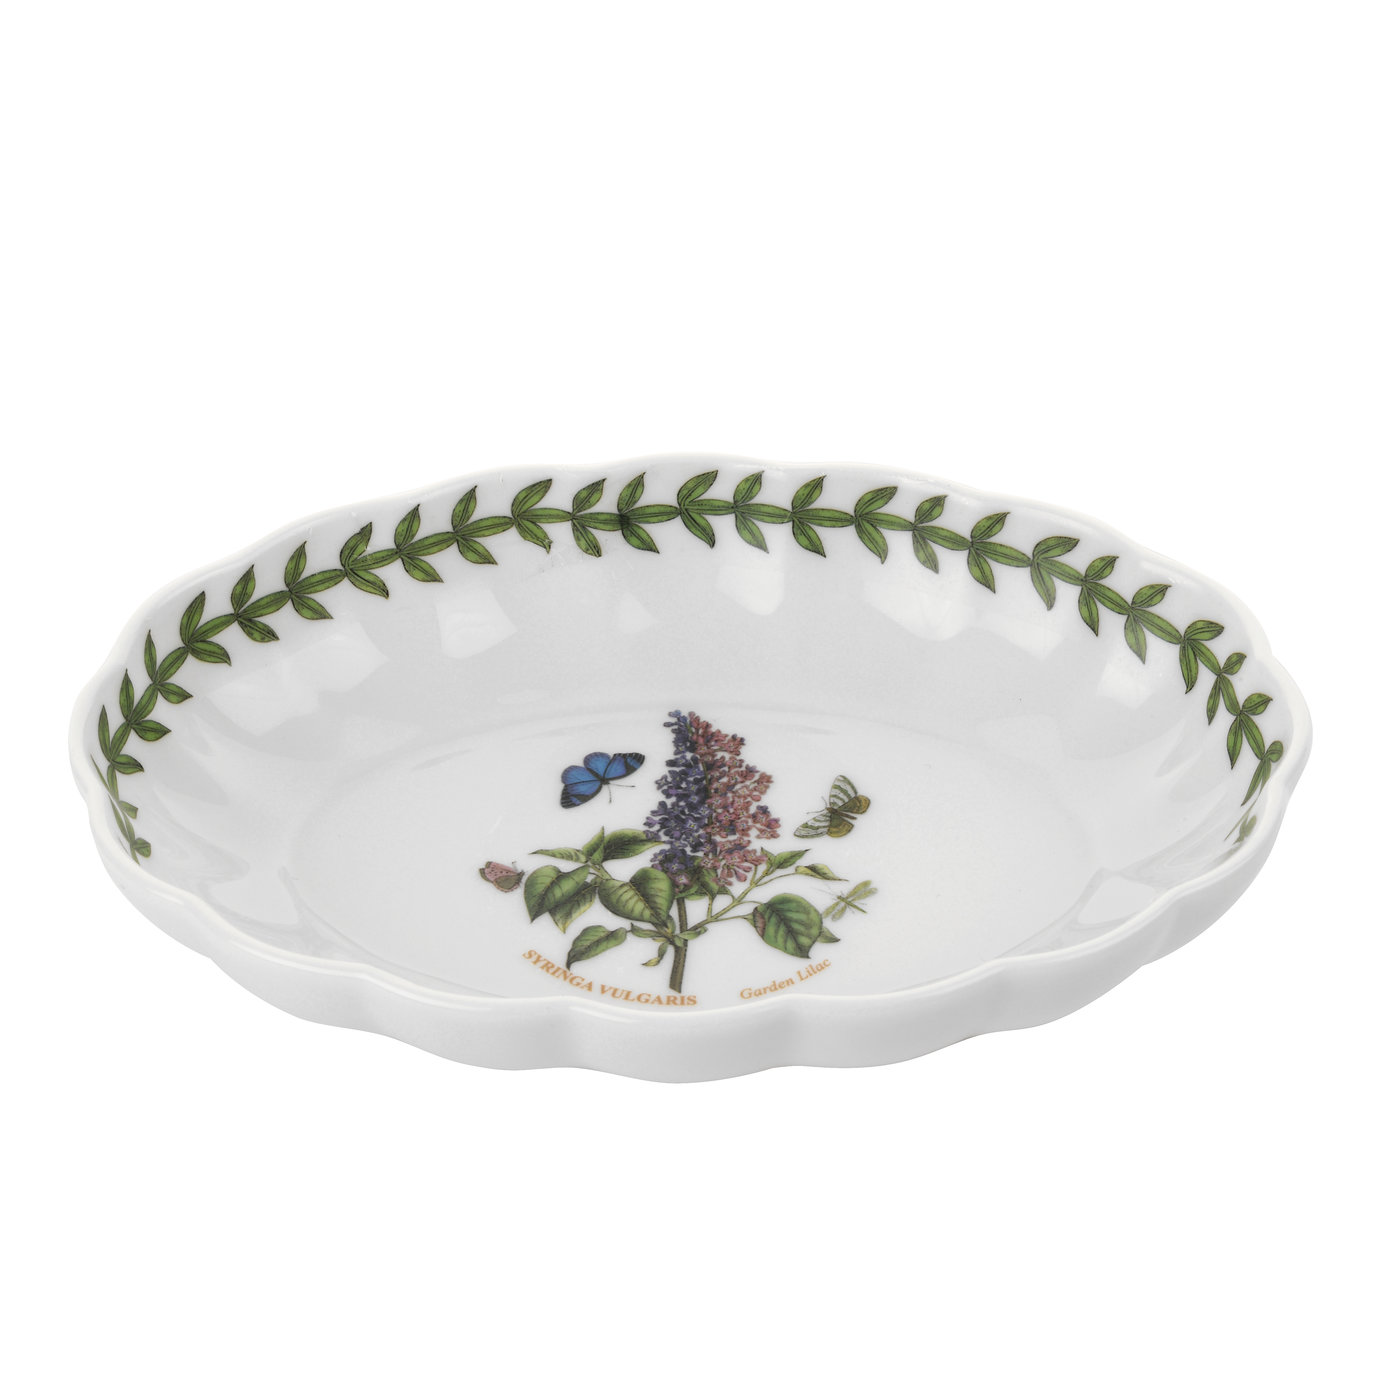 Botanic Garden 6 Inch Fluted Oval Dish (Garden Lilac) image number null